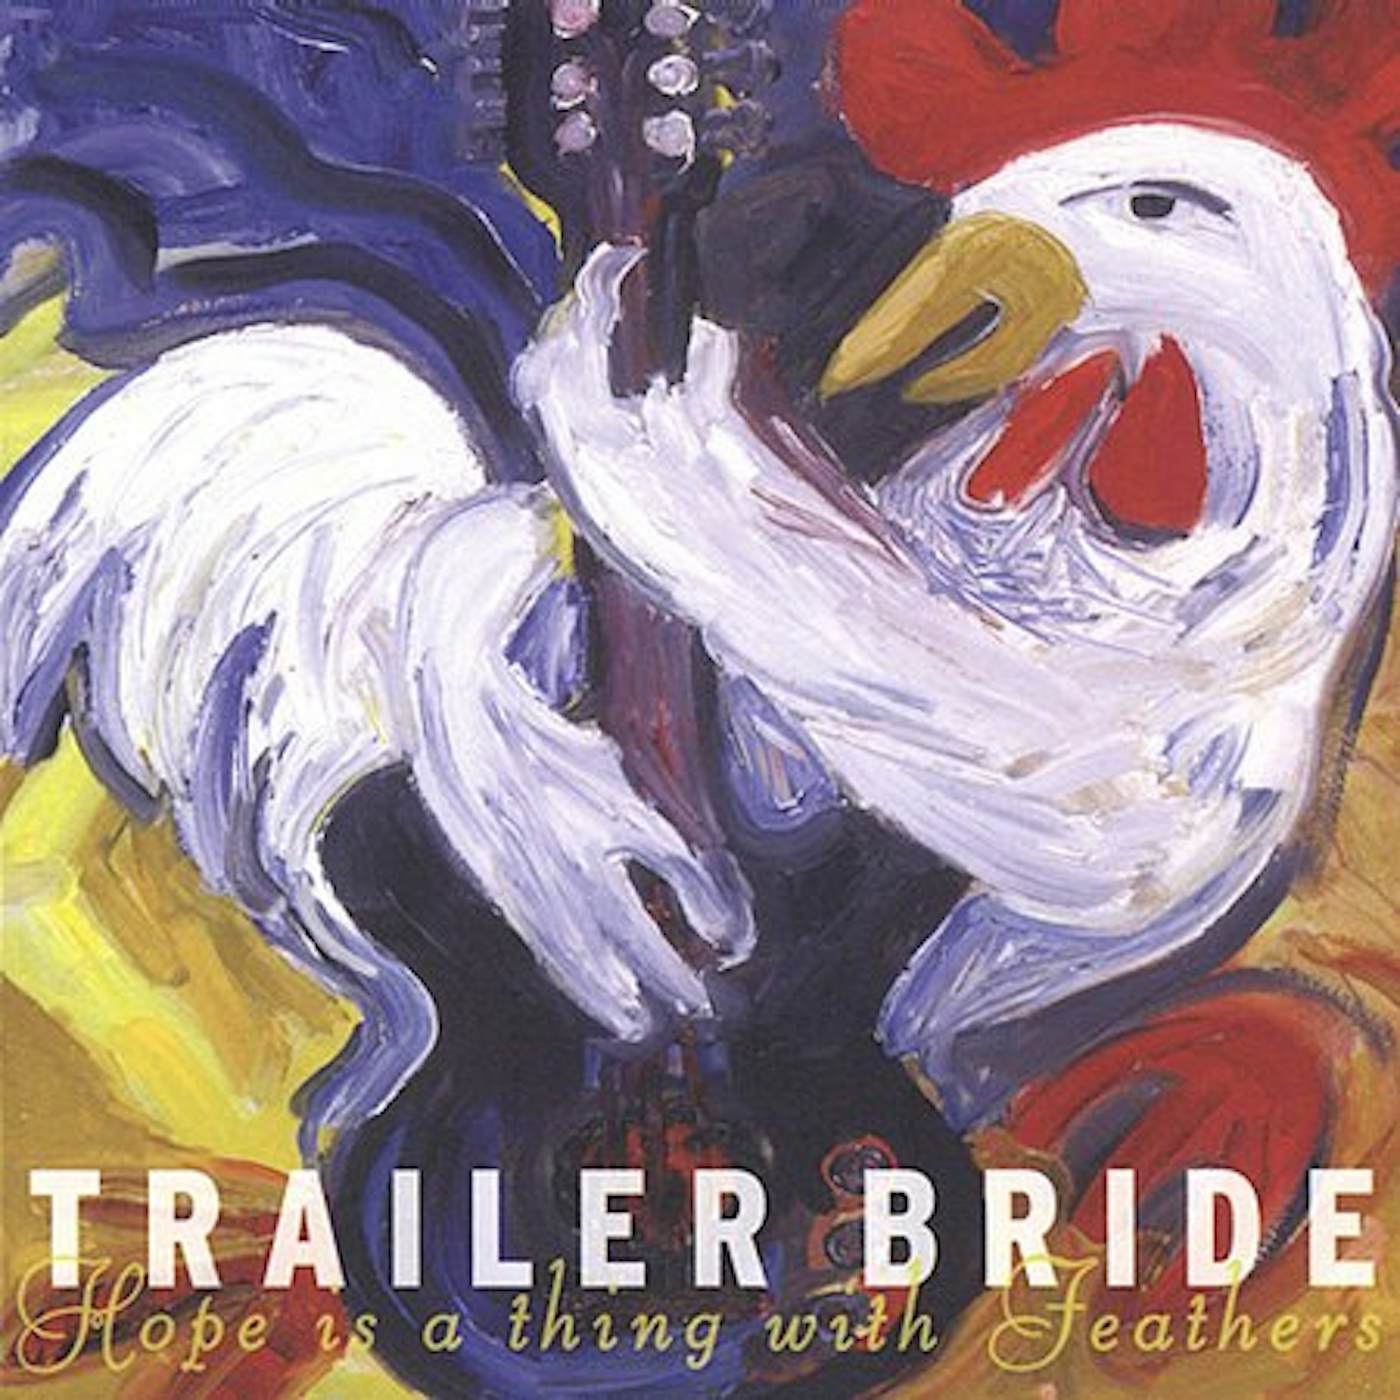 Trailer Bride HOPE IS A THING WITH FEATHERS CD